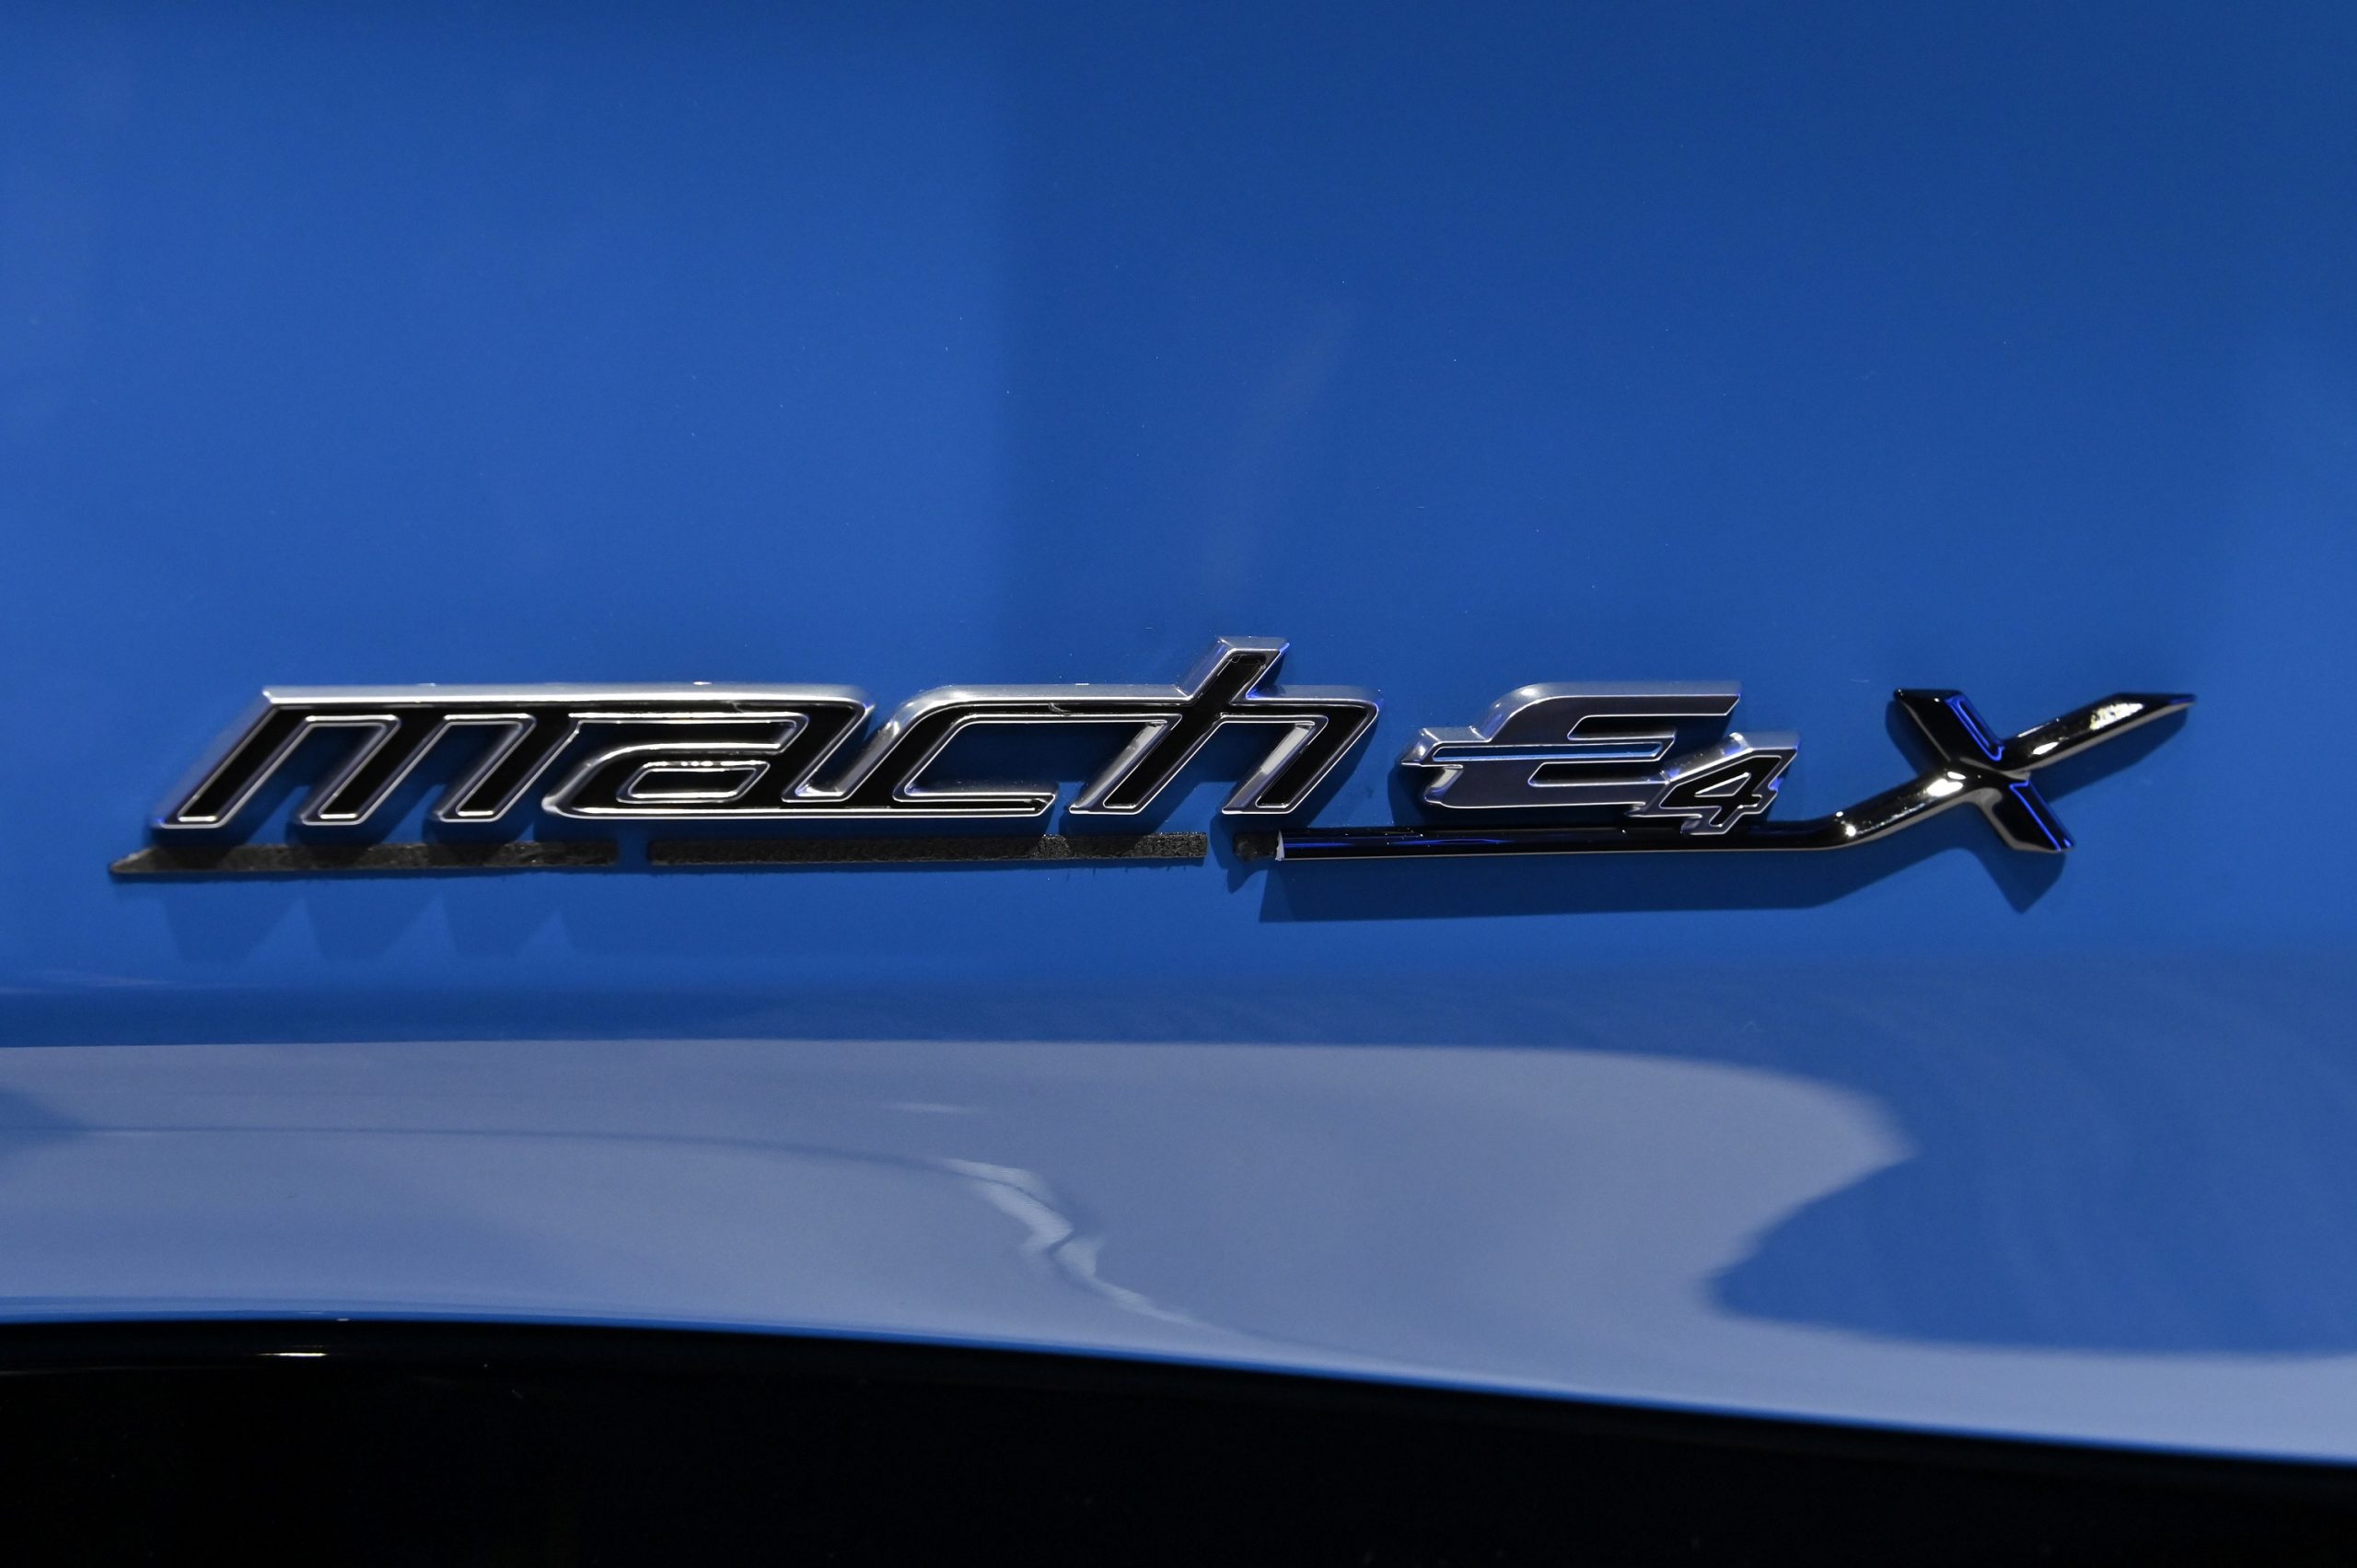 The badge on the blue Ford Mustang Mach E